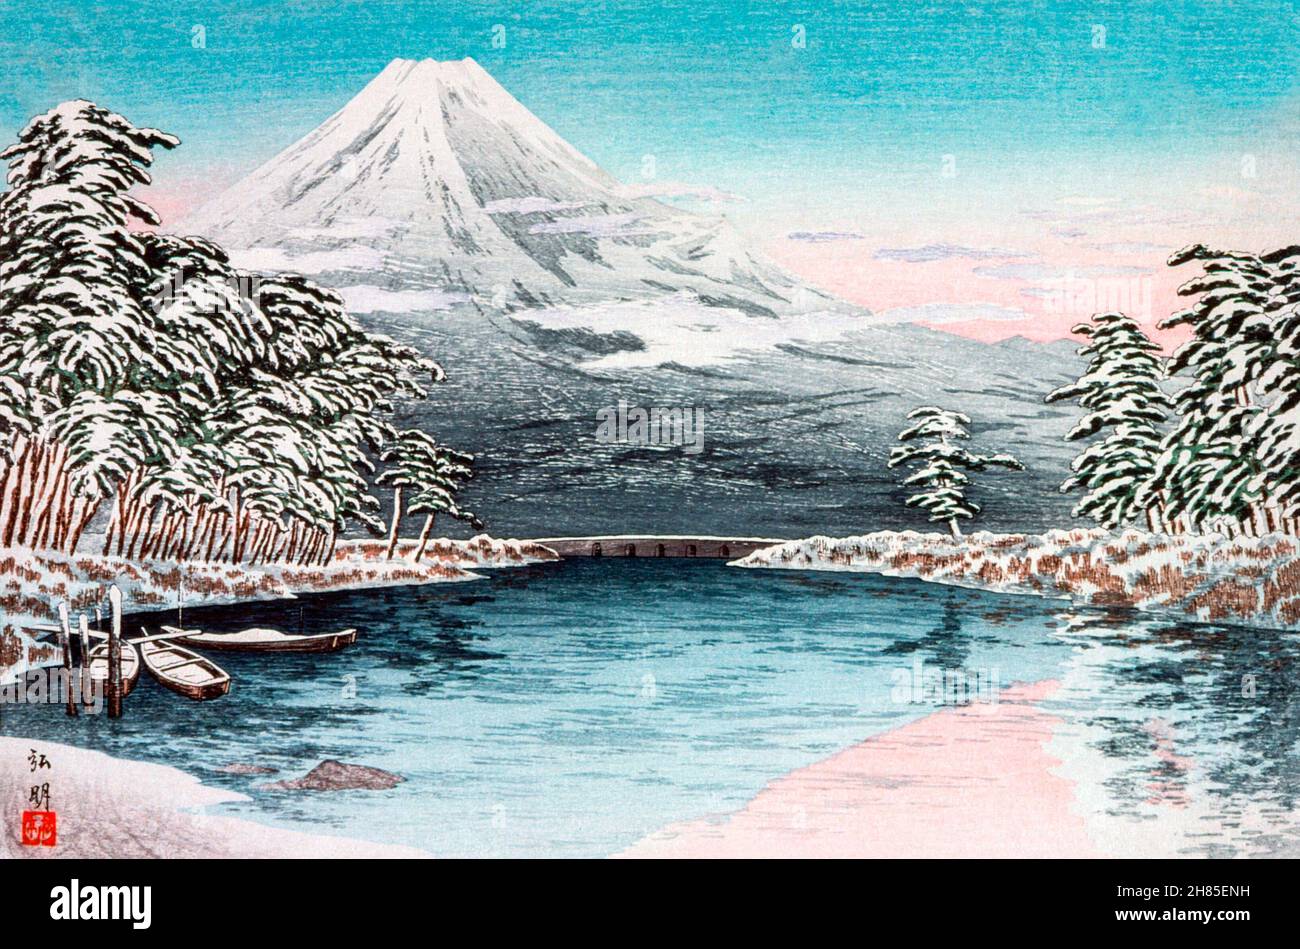 Japanese art snow scene  Glossy Photo print A4 or A5 size 